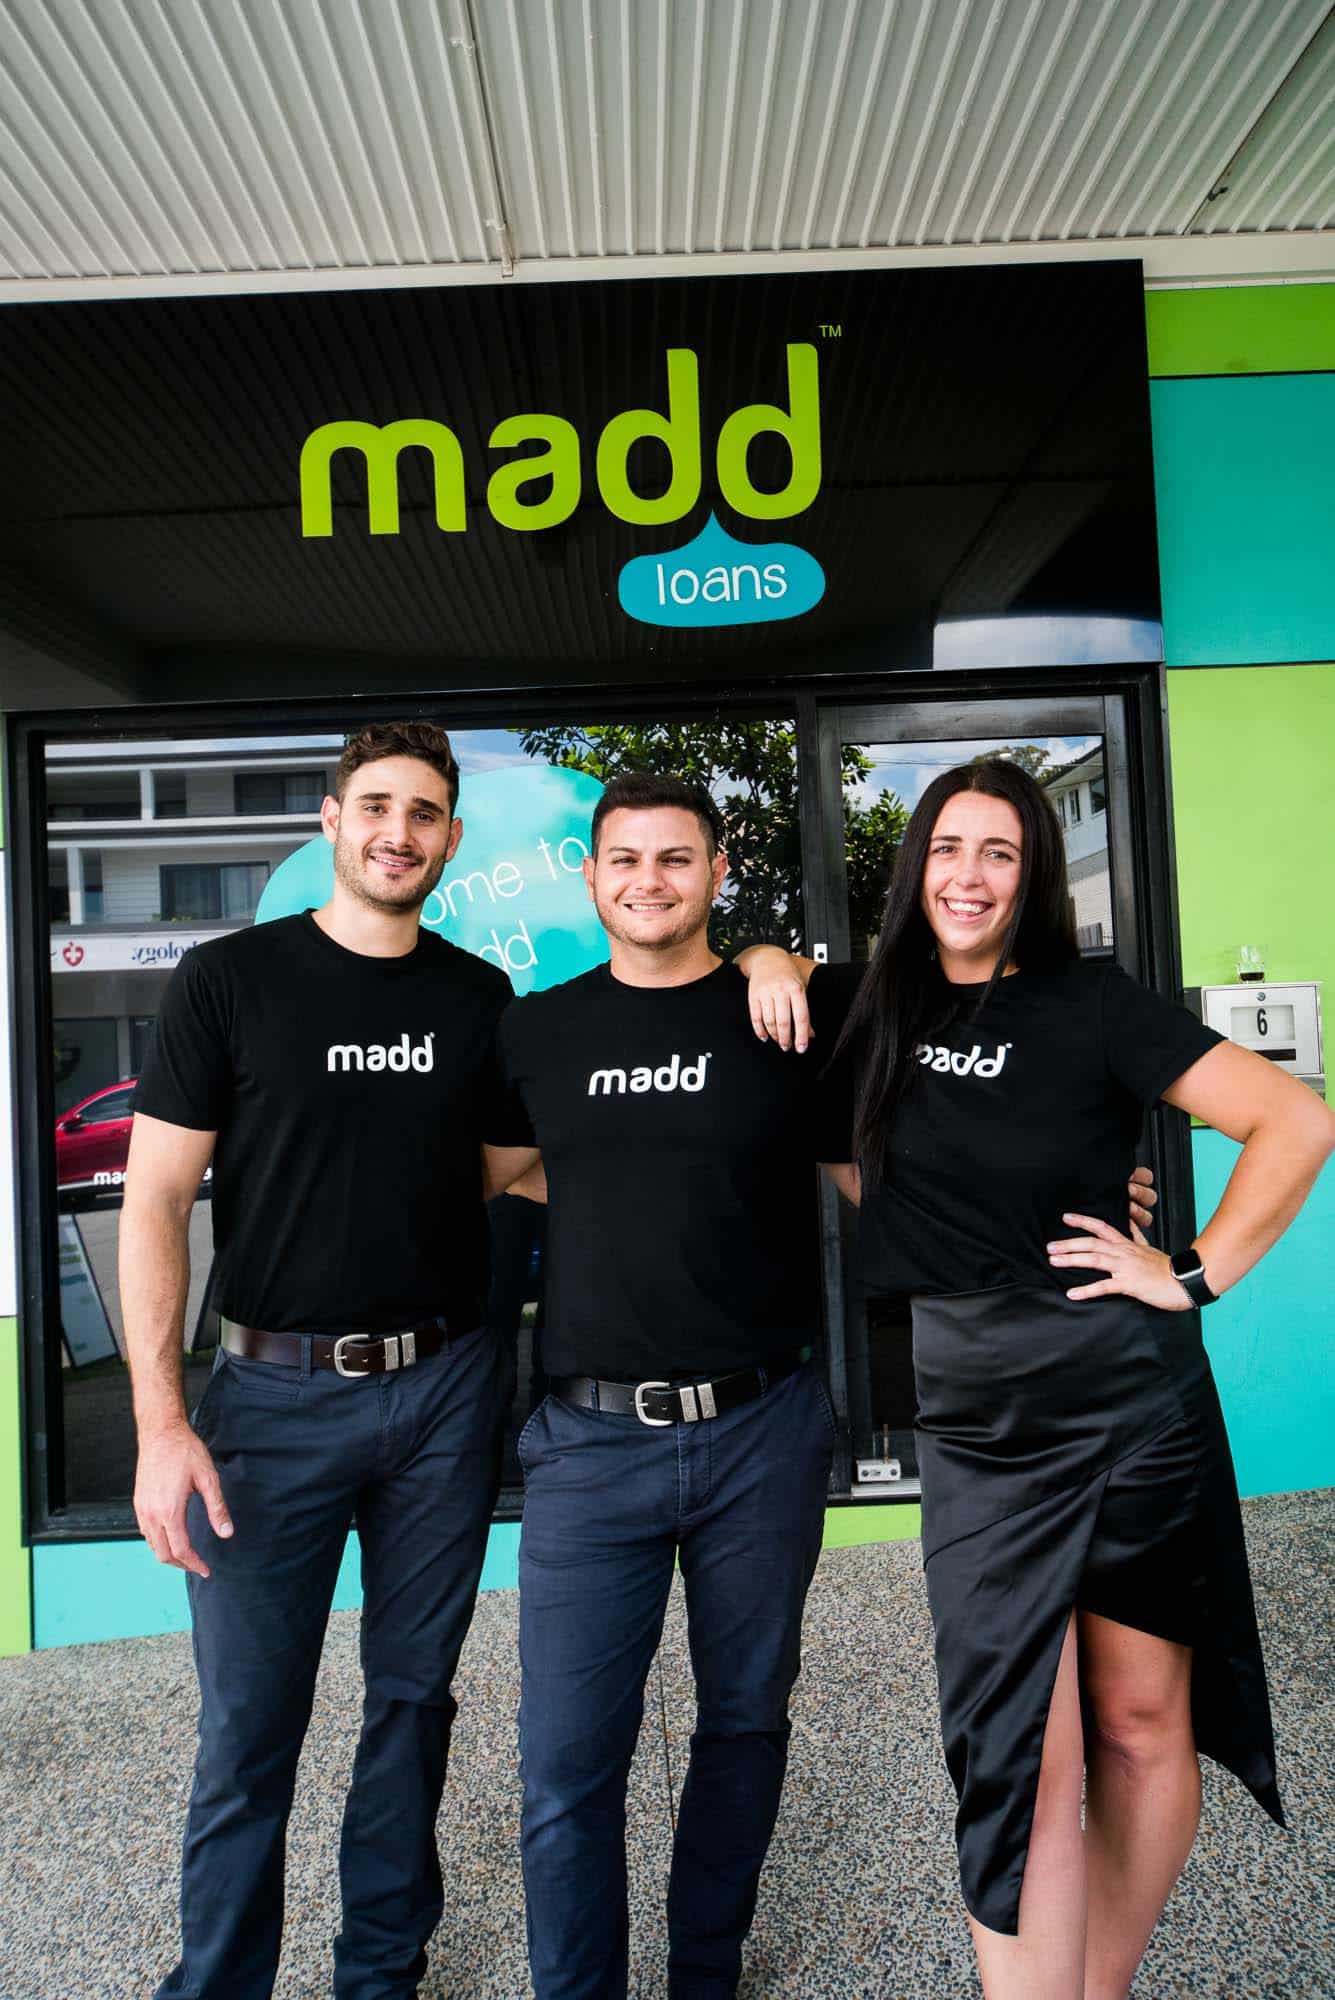 The Madd Loans broker team talking about doctors home loan options